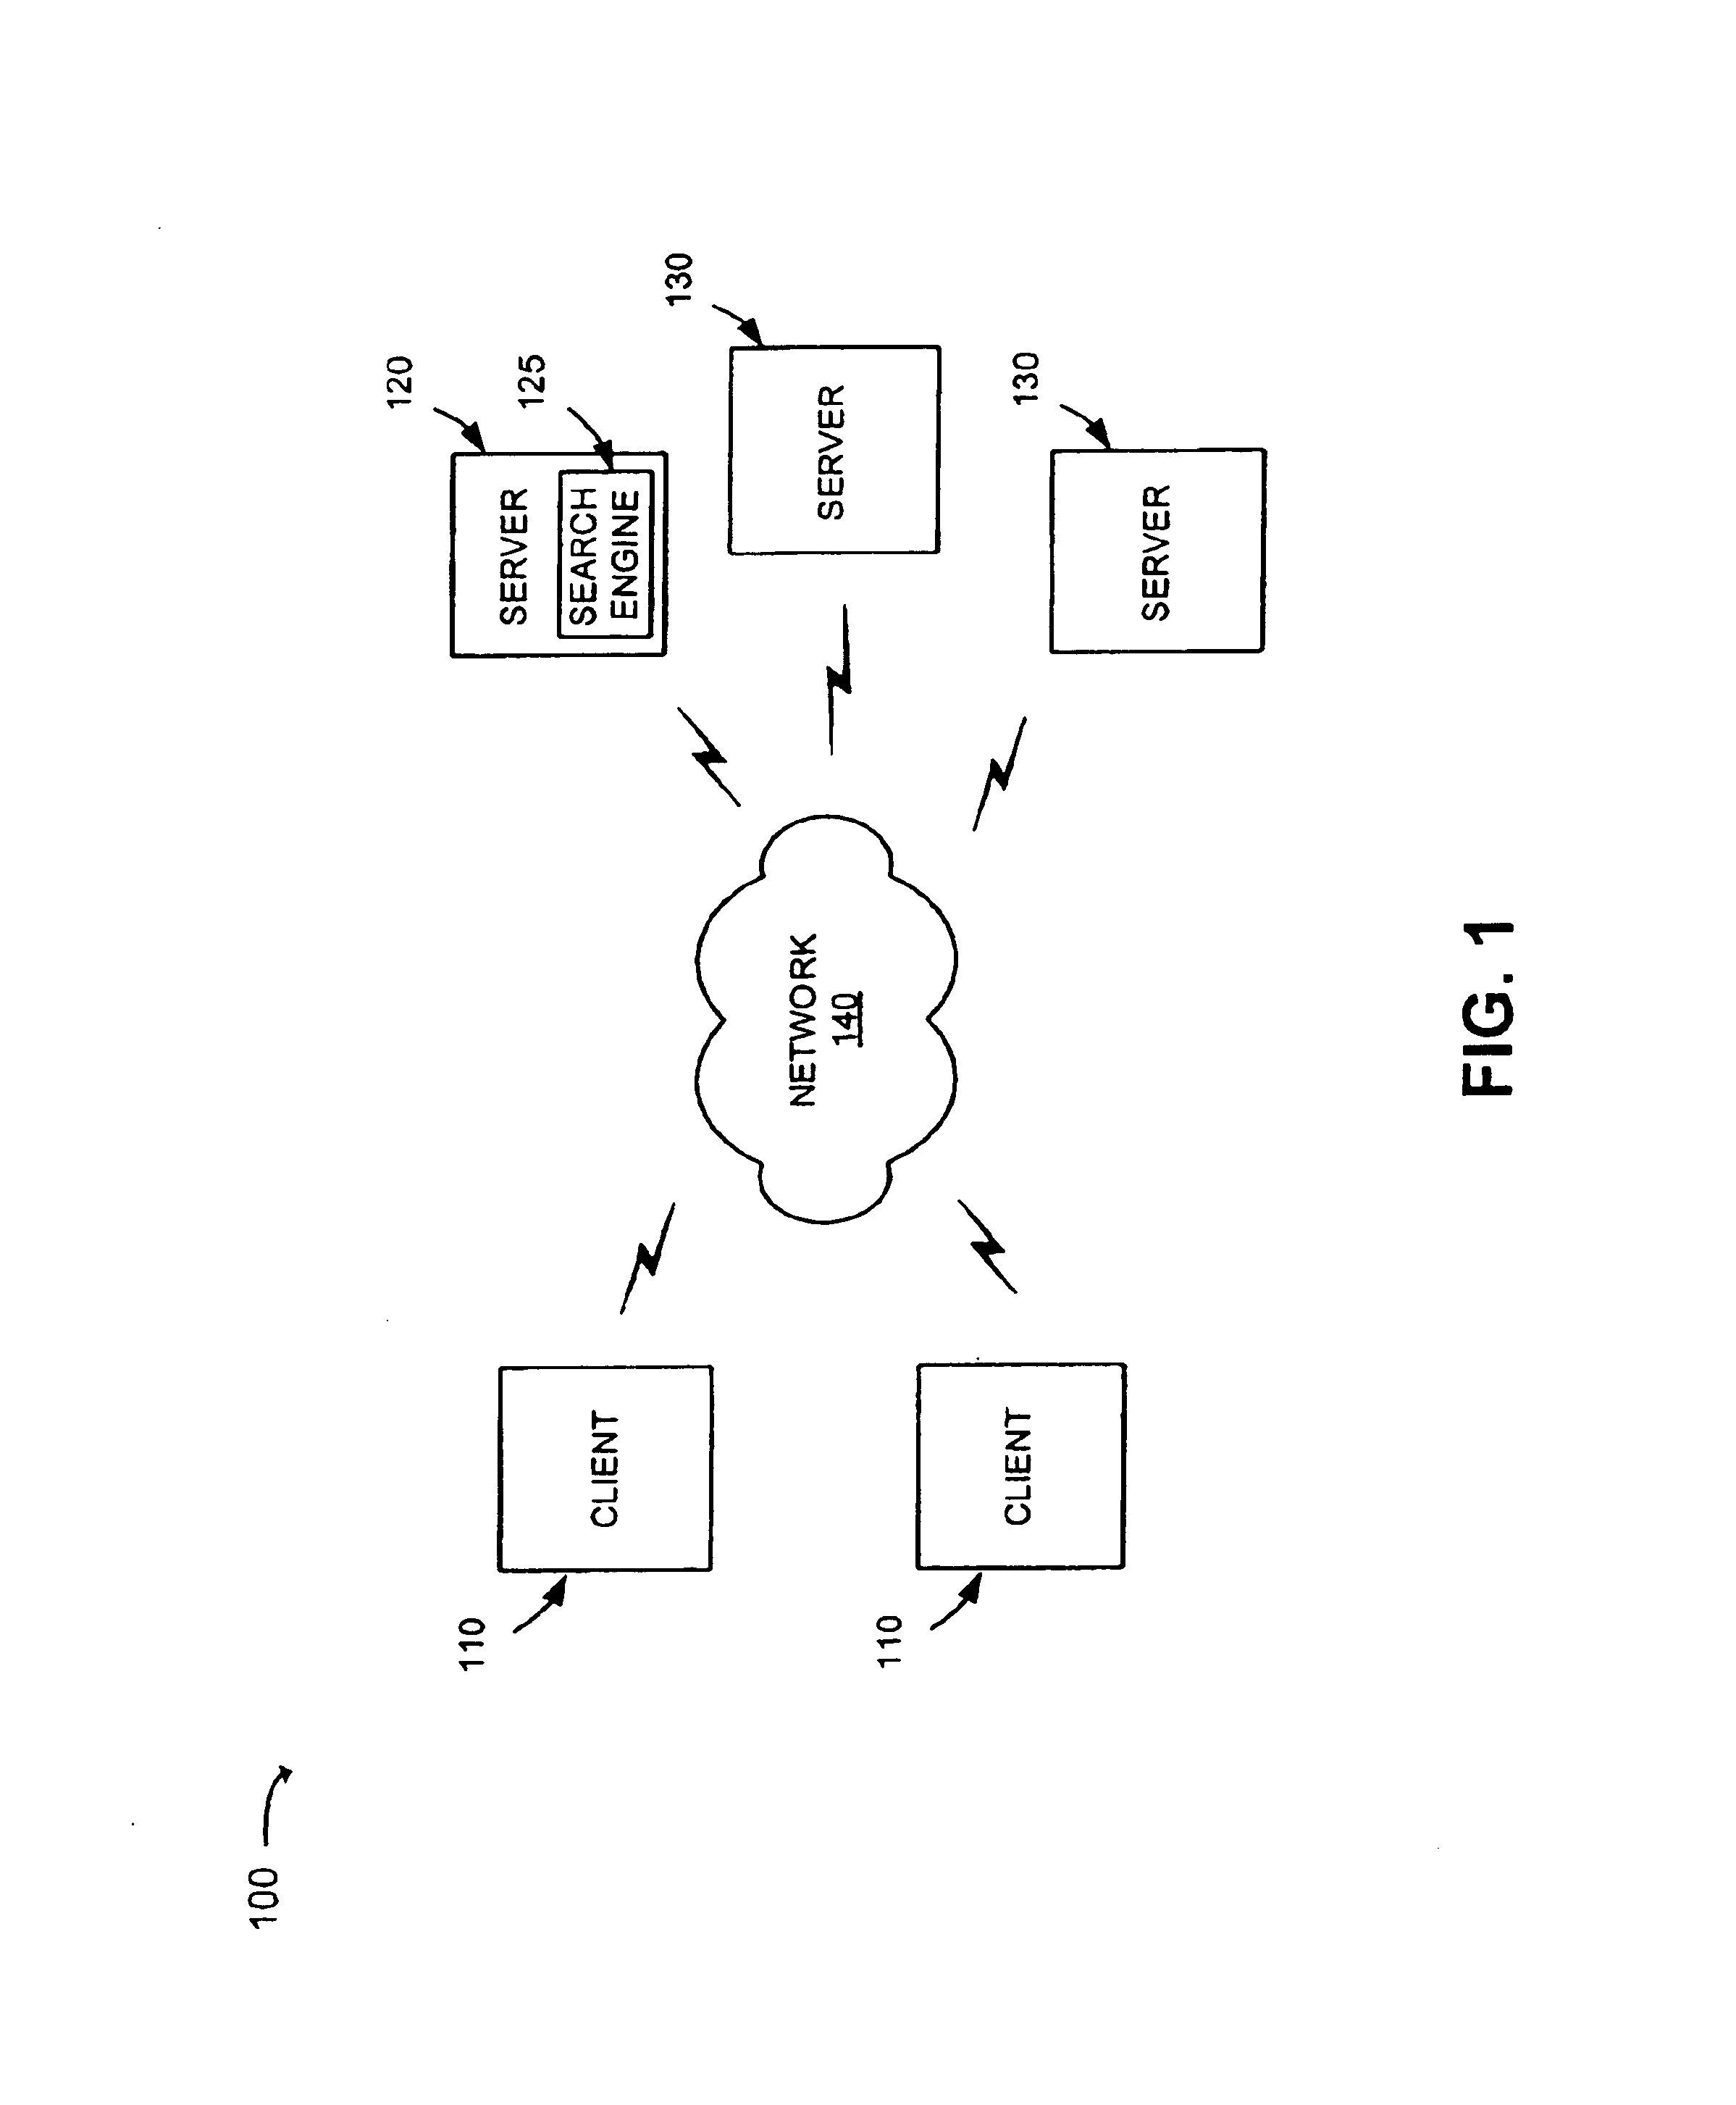 Methods and apparatus for using a modified index to provide search results in response to an ambiguous search query